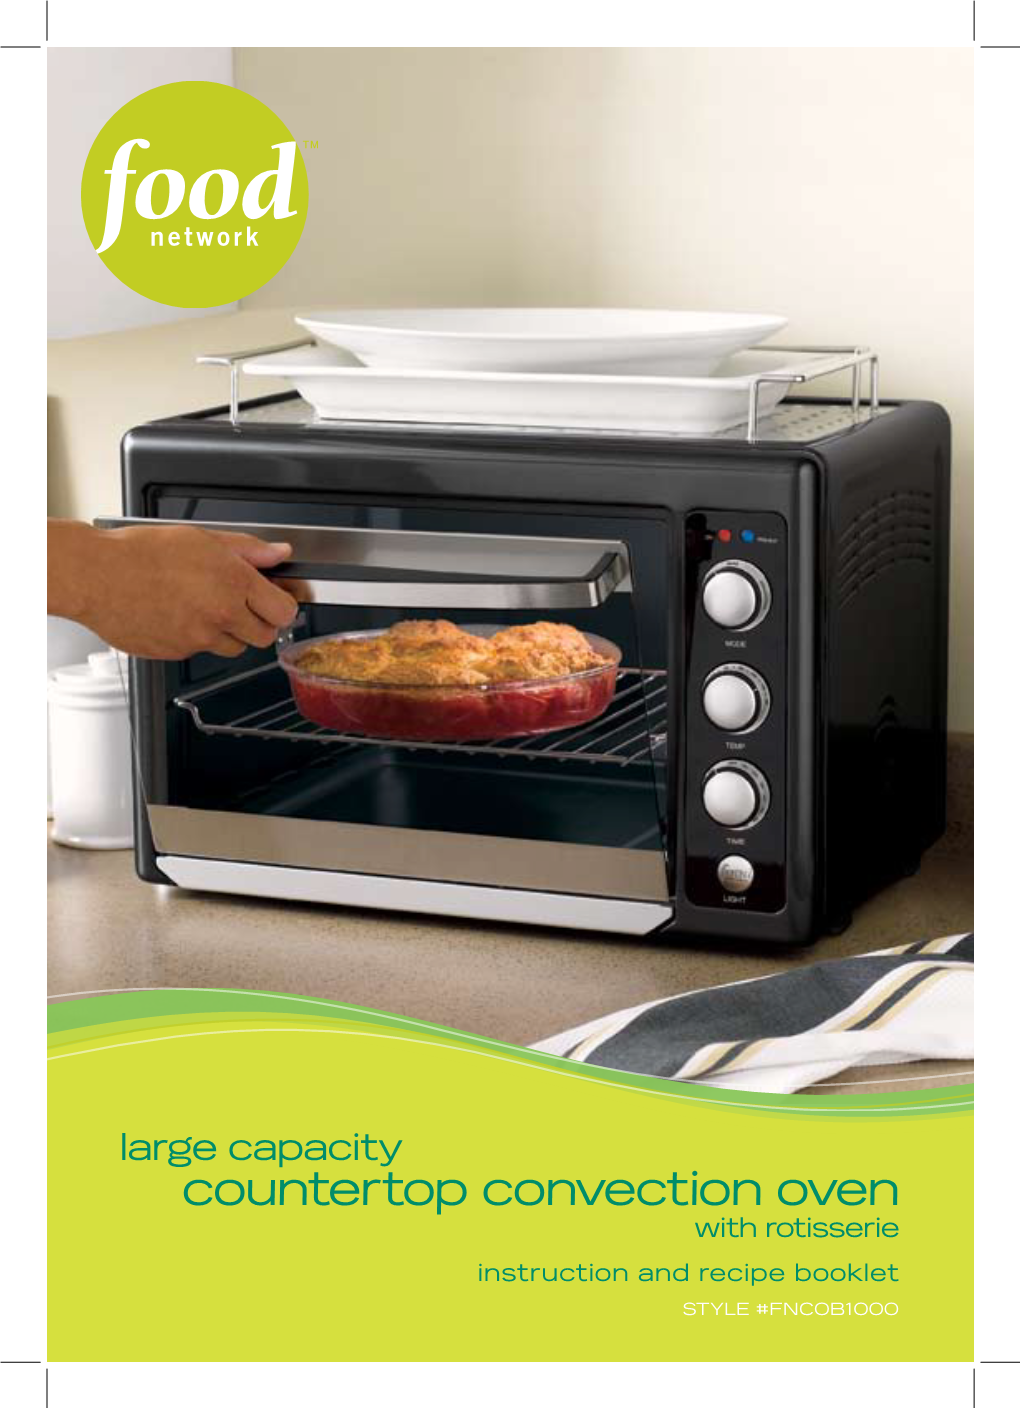 Countertop Convection Oven with Rotisserie Instruction and Recipe Booklet STYLE #FNCOB1000 Table of Contents